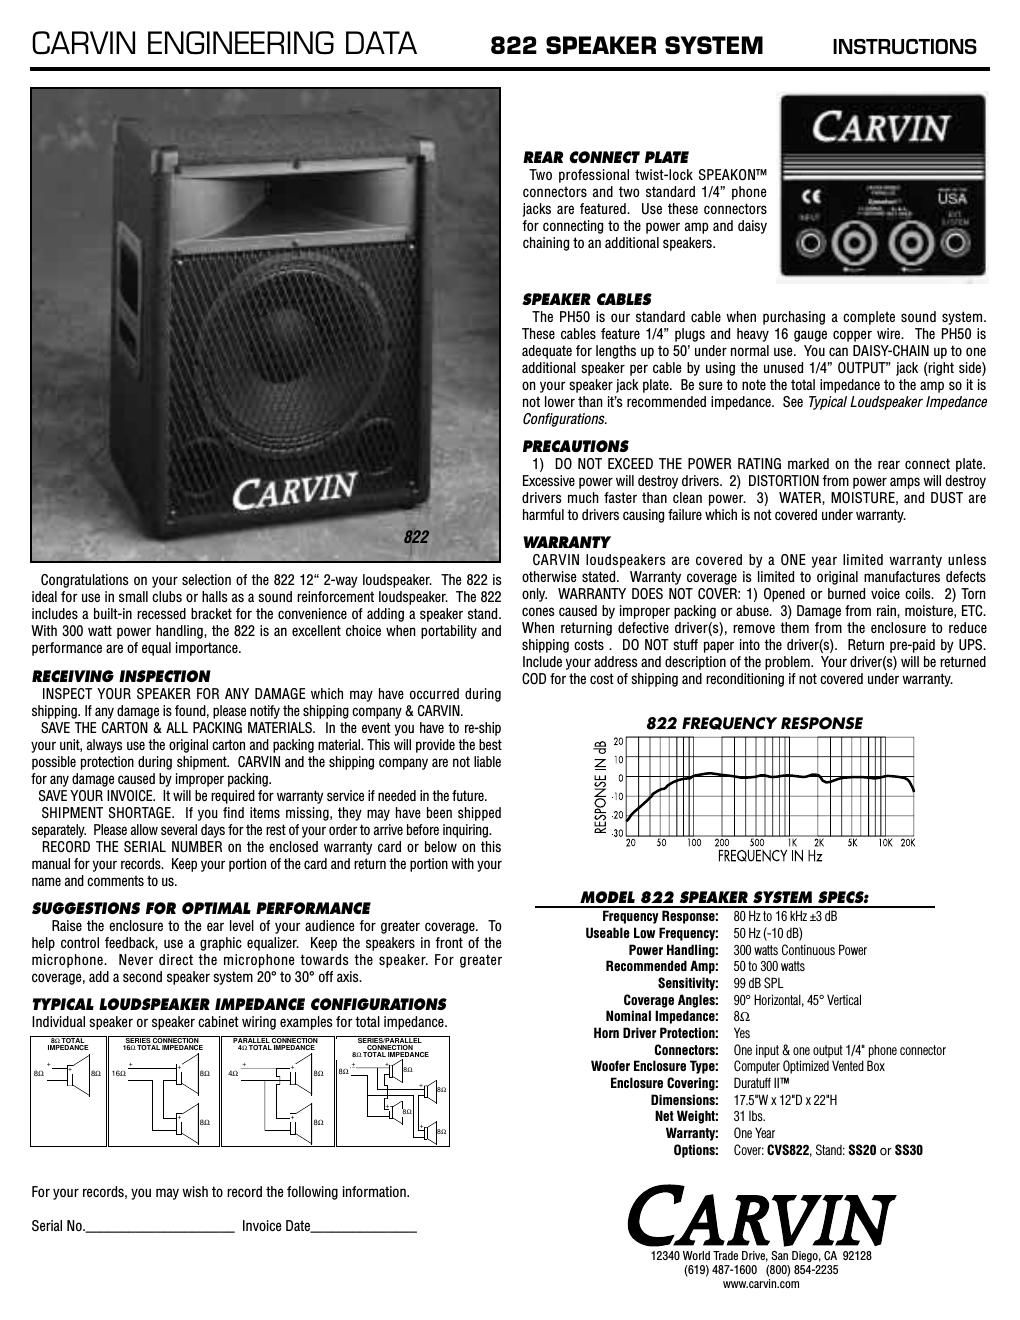 carvin 822 owners manual